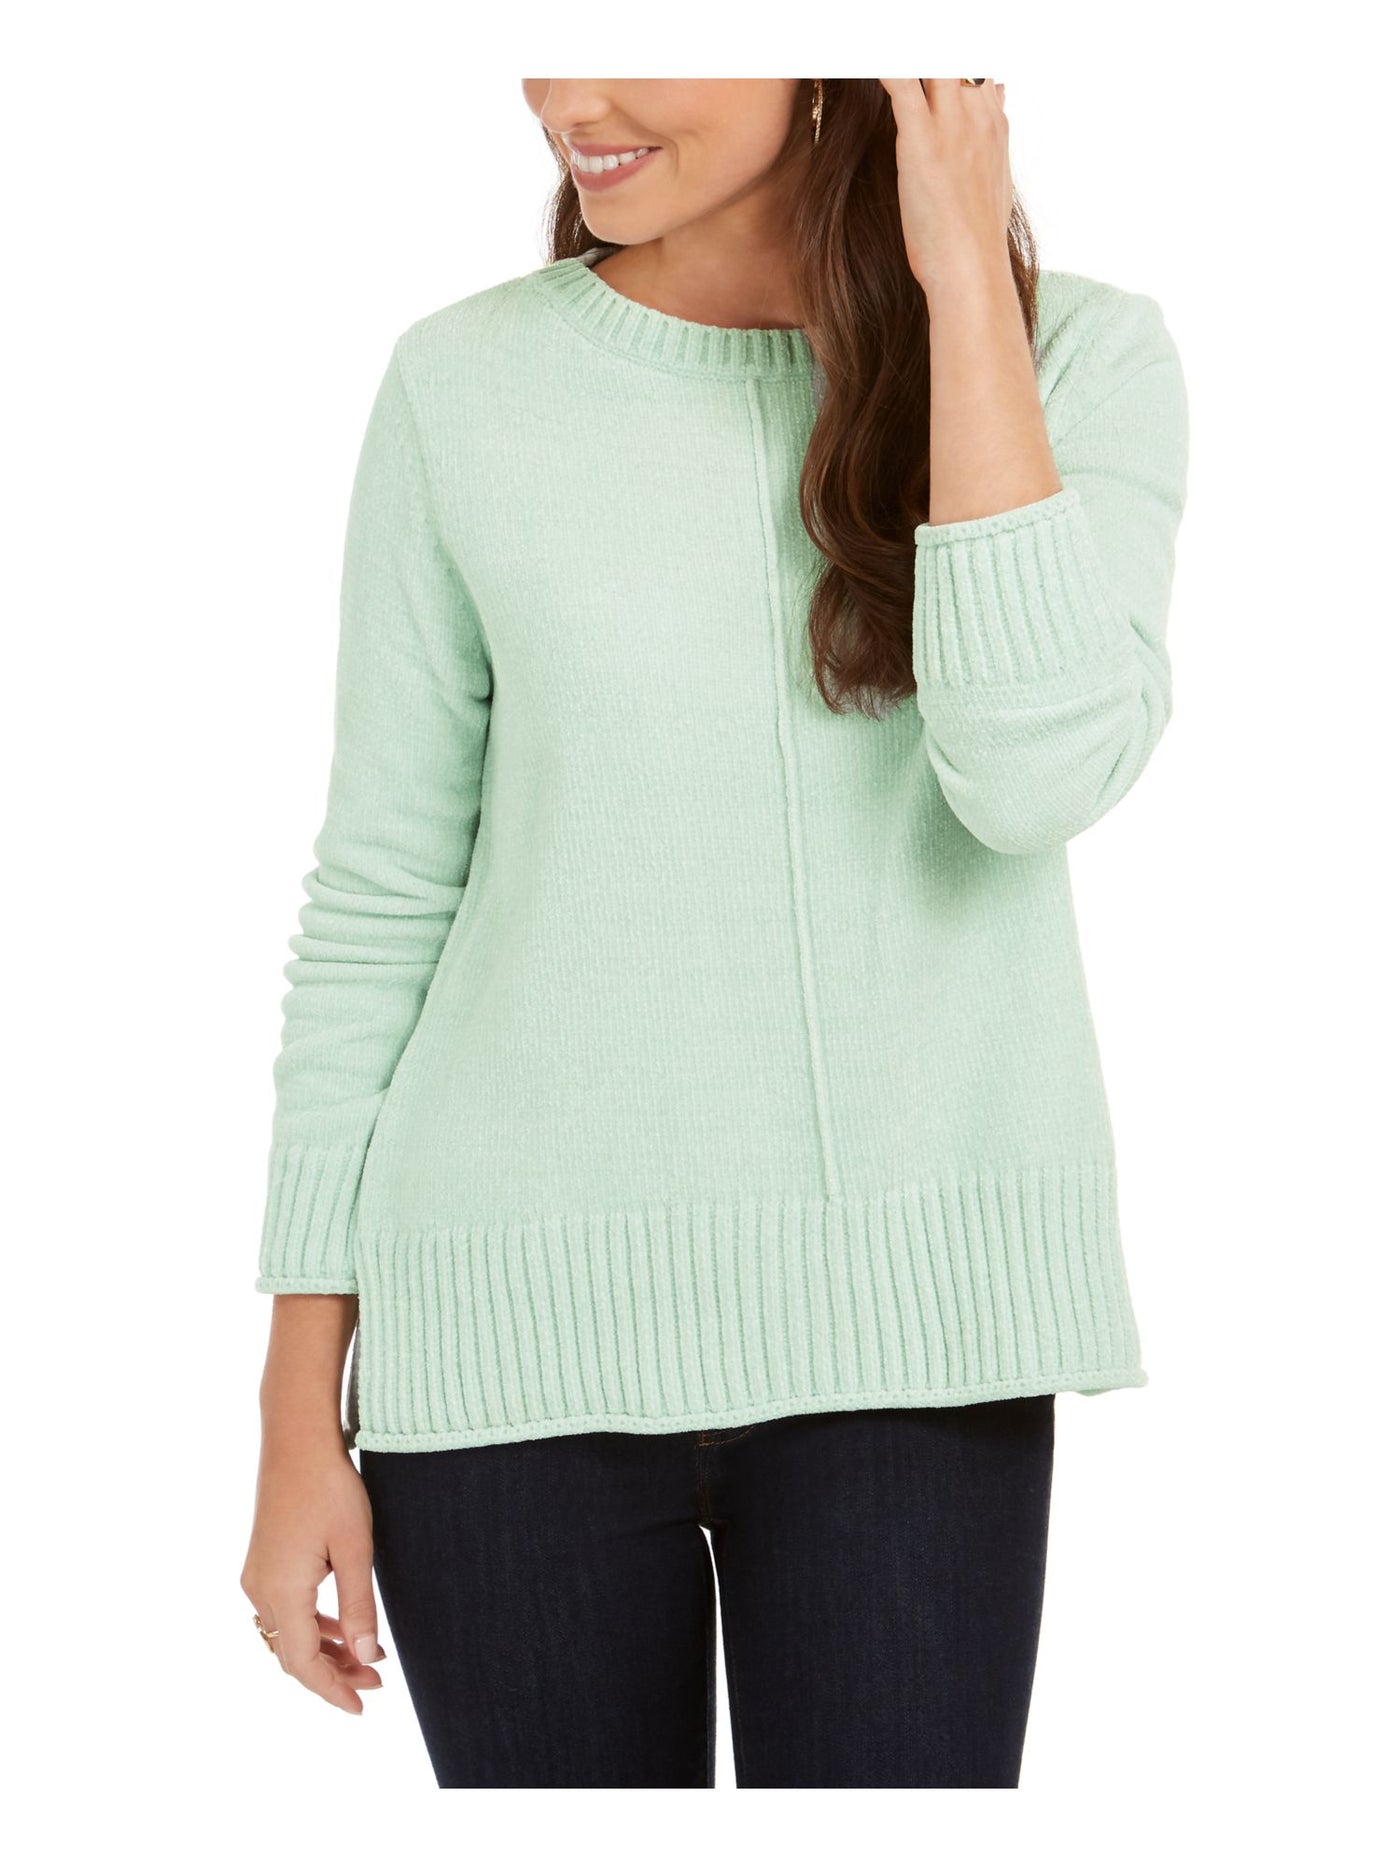 STYLE & COMPANY Womens Green Textured Heather Long Sleeve Crew Neck Blouse S